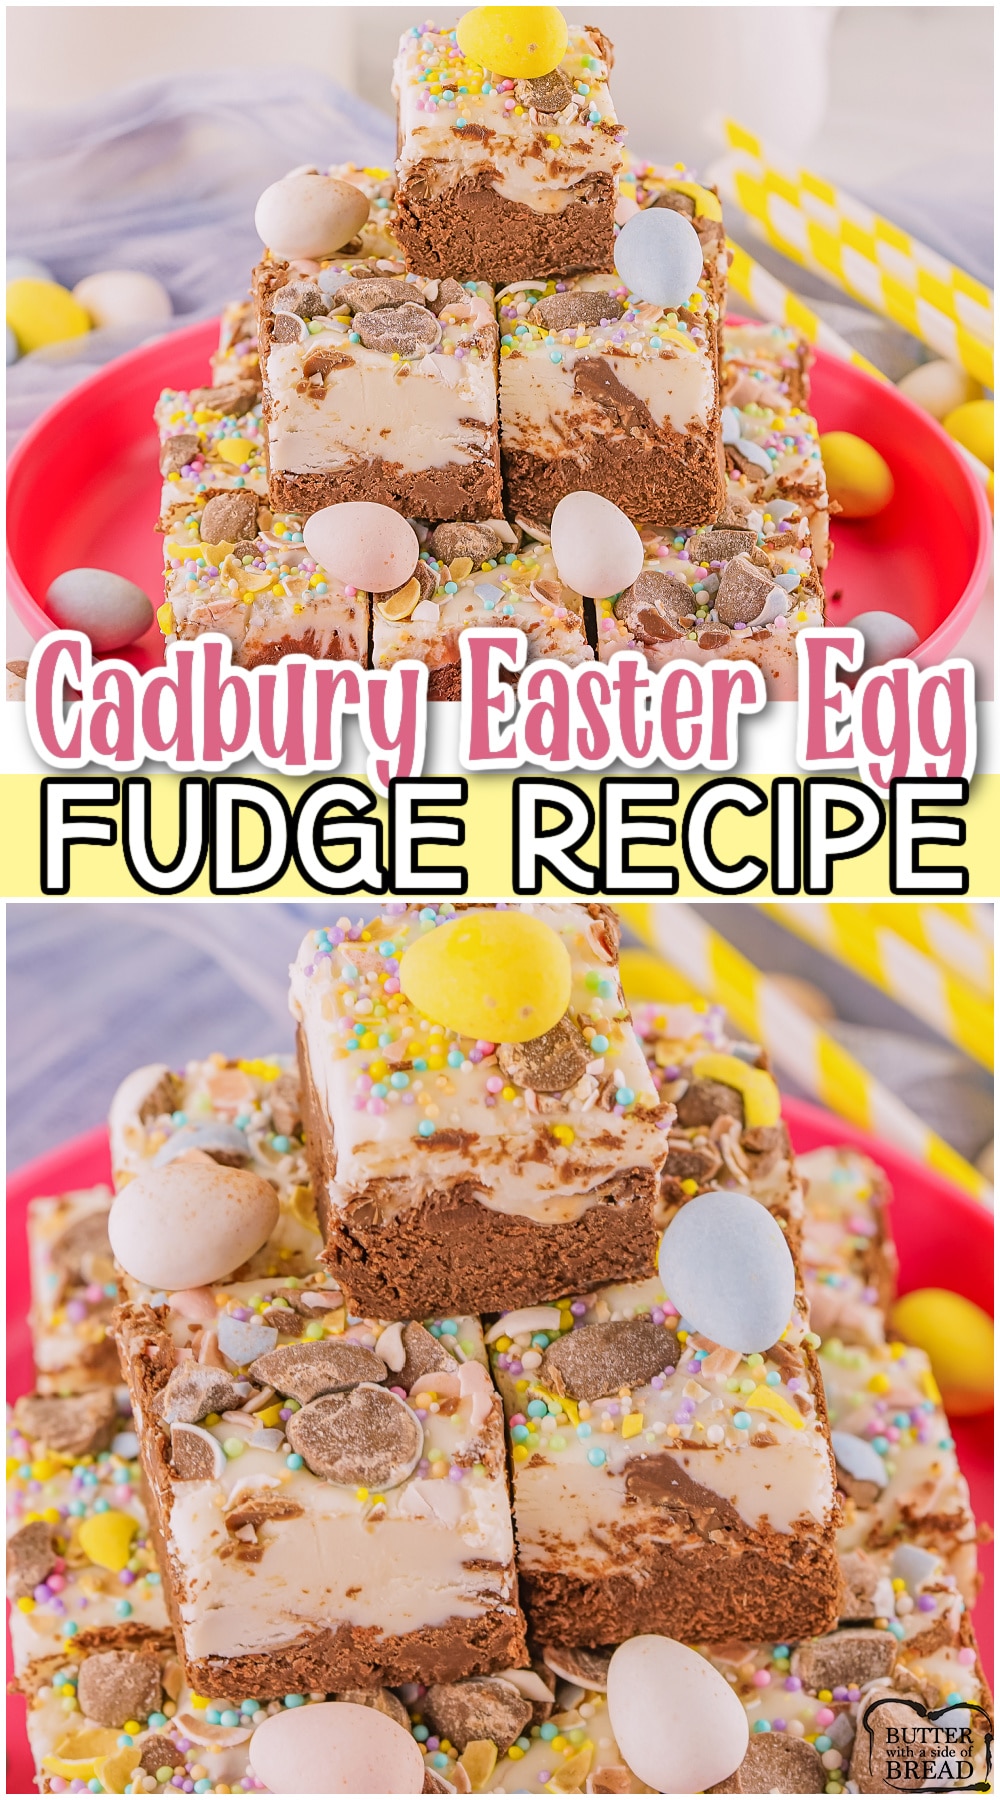 Cadbury Easter Egg Fudge made easy with all your favorite Easter candy! Cadbury eggs combined with a creamy layered chocolate fudge for a deliciously rich festive treat!